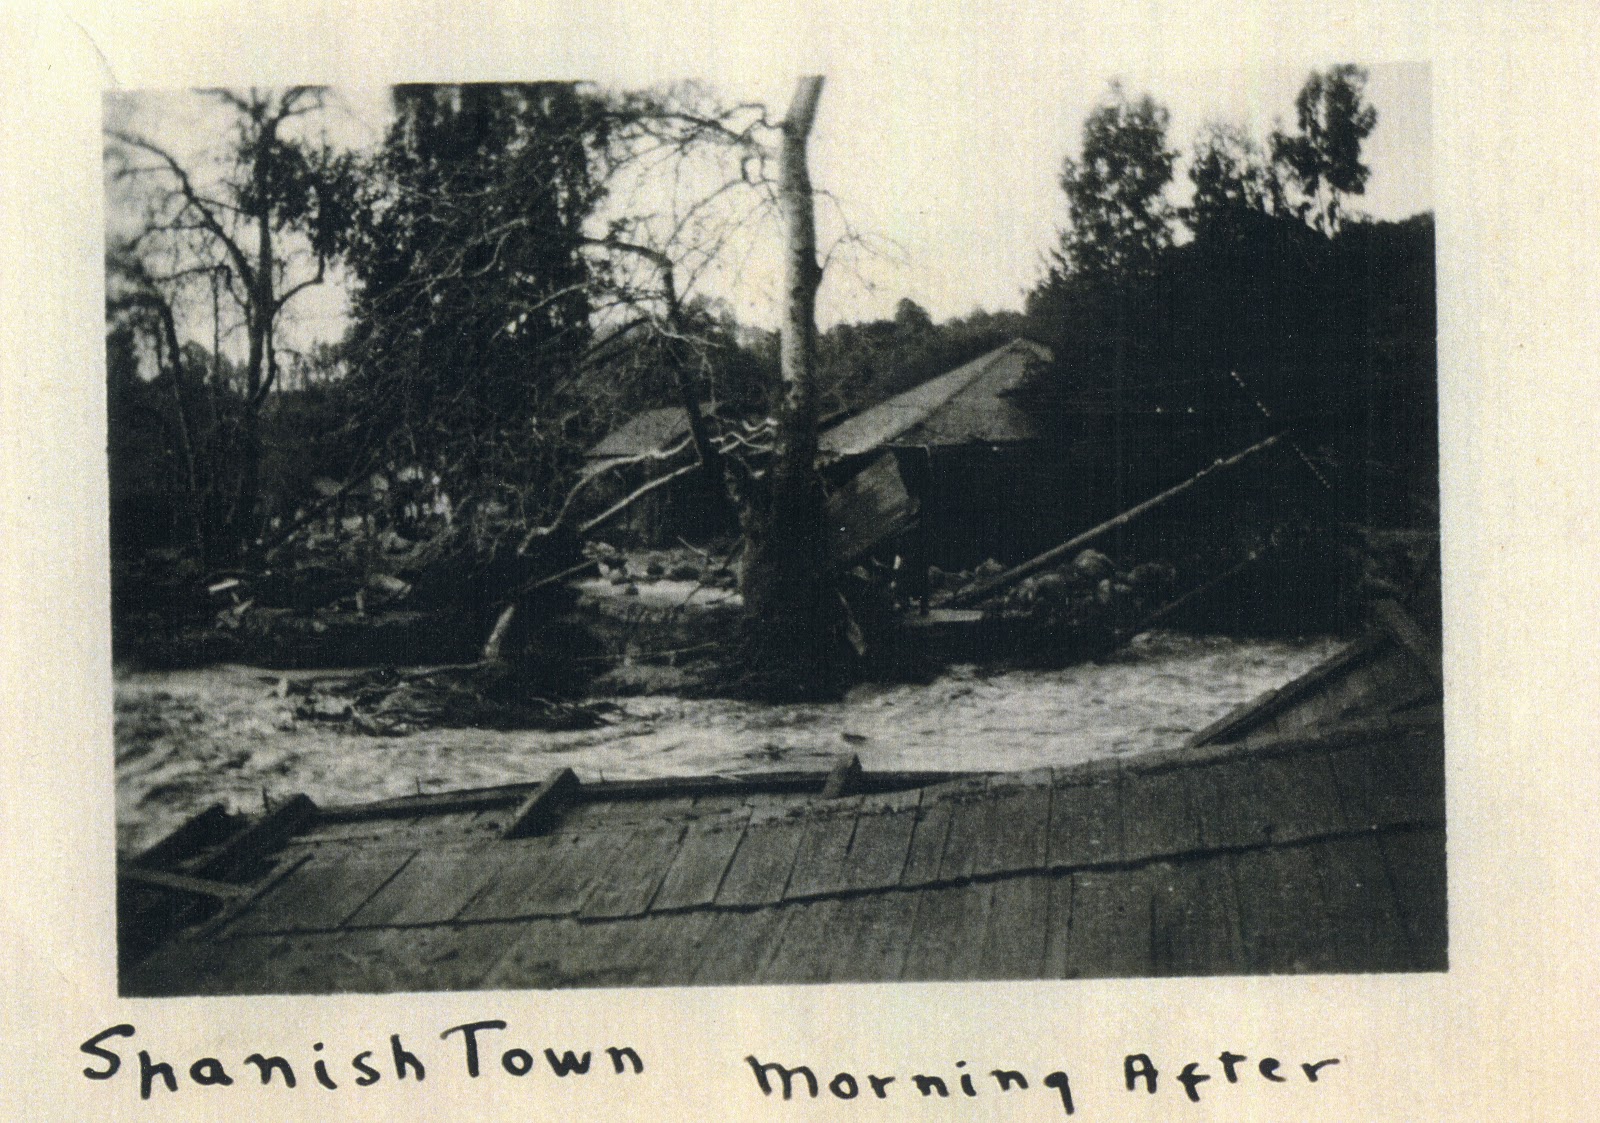 Old Spanish Town in Montecito, at East Valley Road and Montecito Creek, 1914.